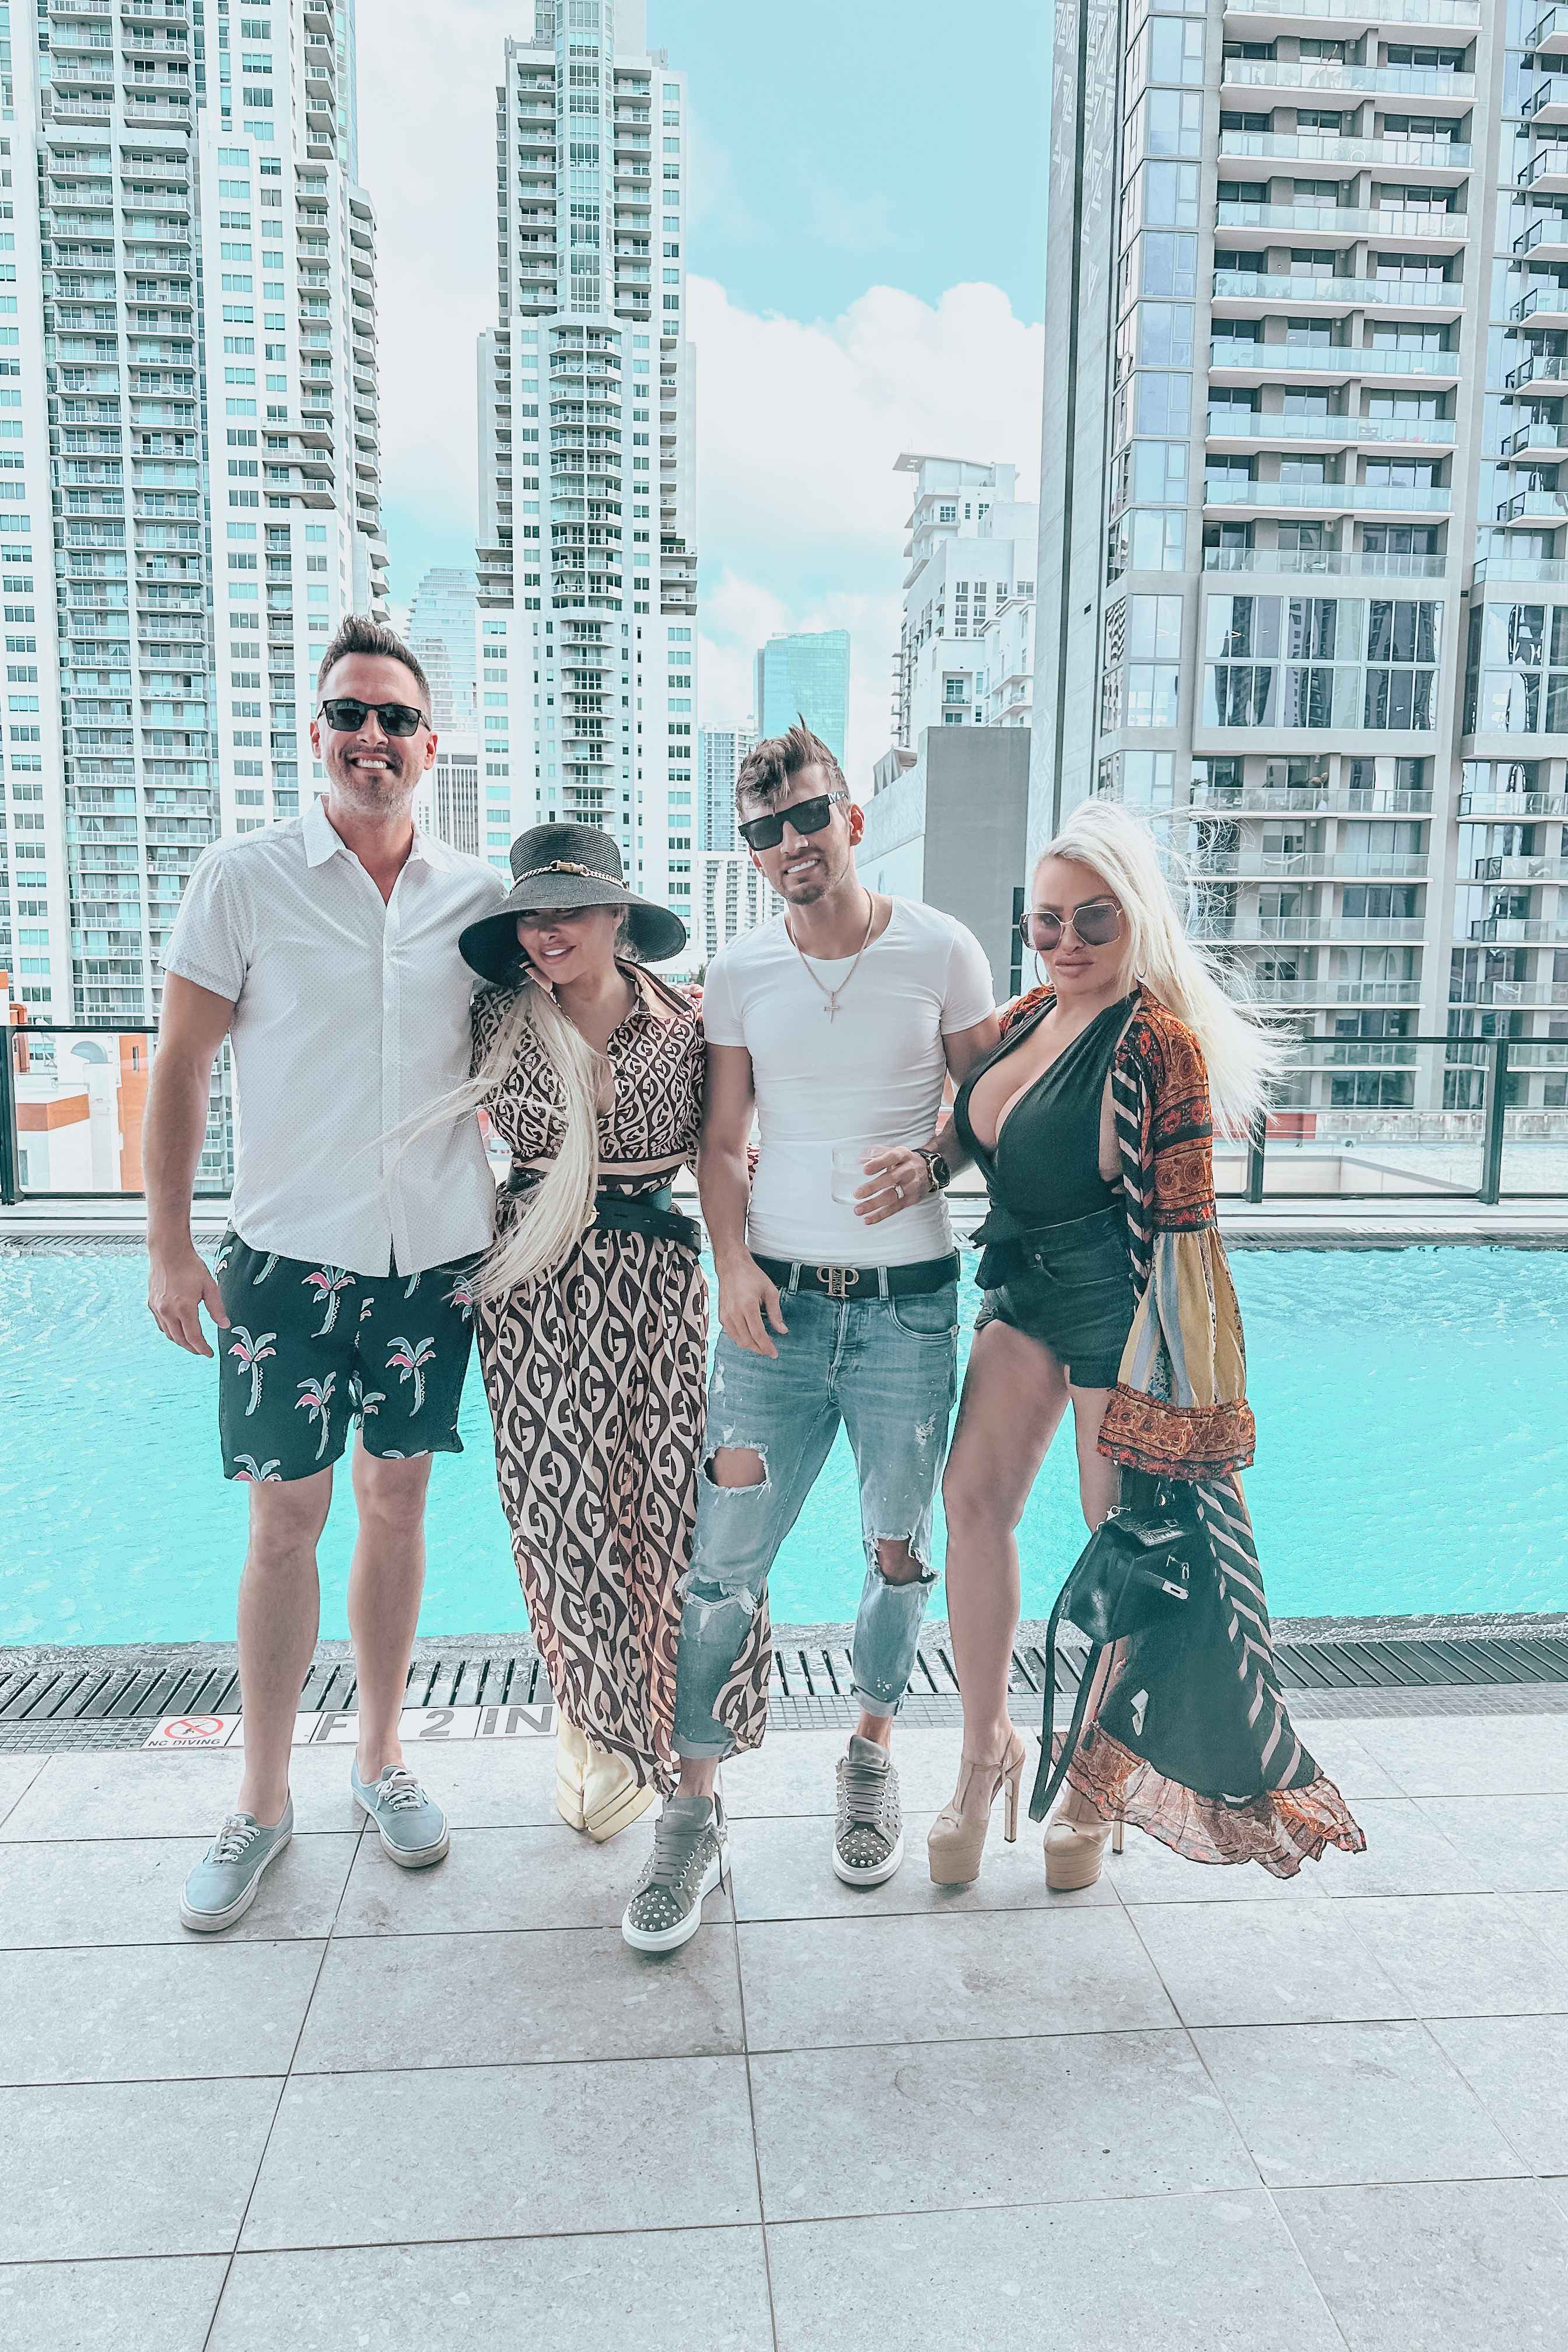 F1 Miami Pool and Watch Party at The Elser Hotel & Residences Draws Celebrities and Tequila Lovers